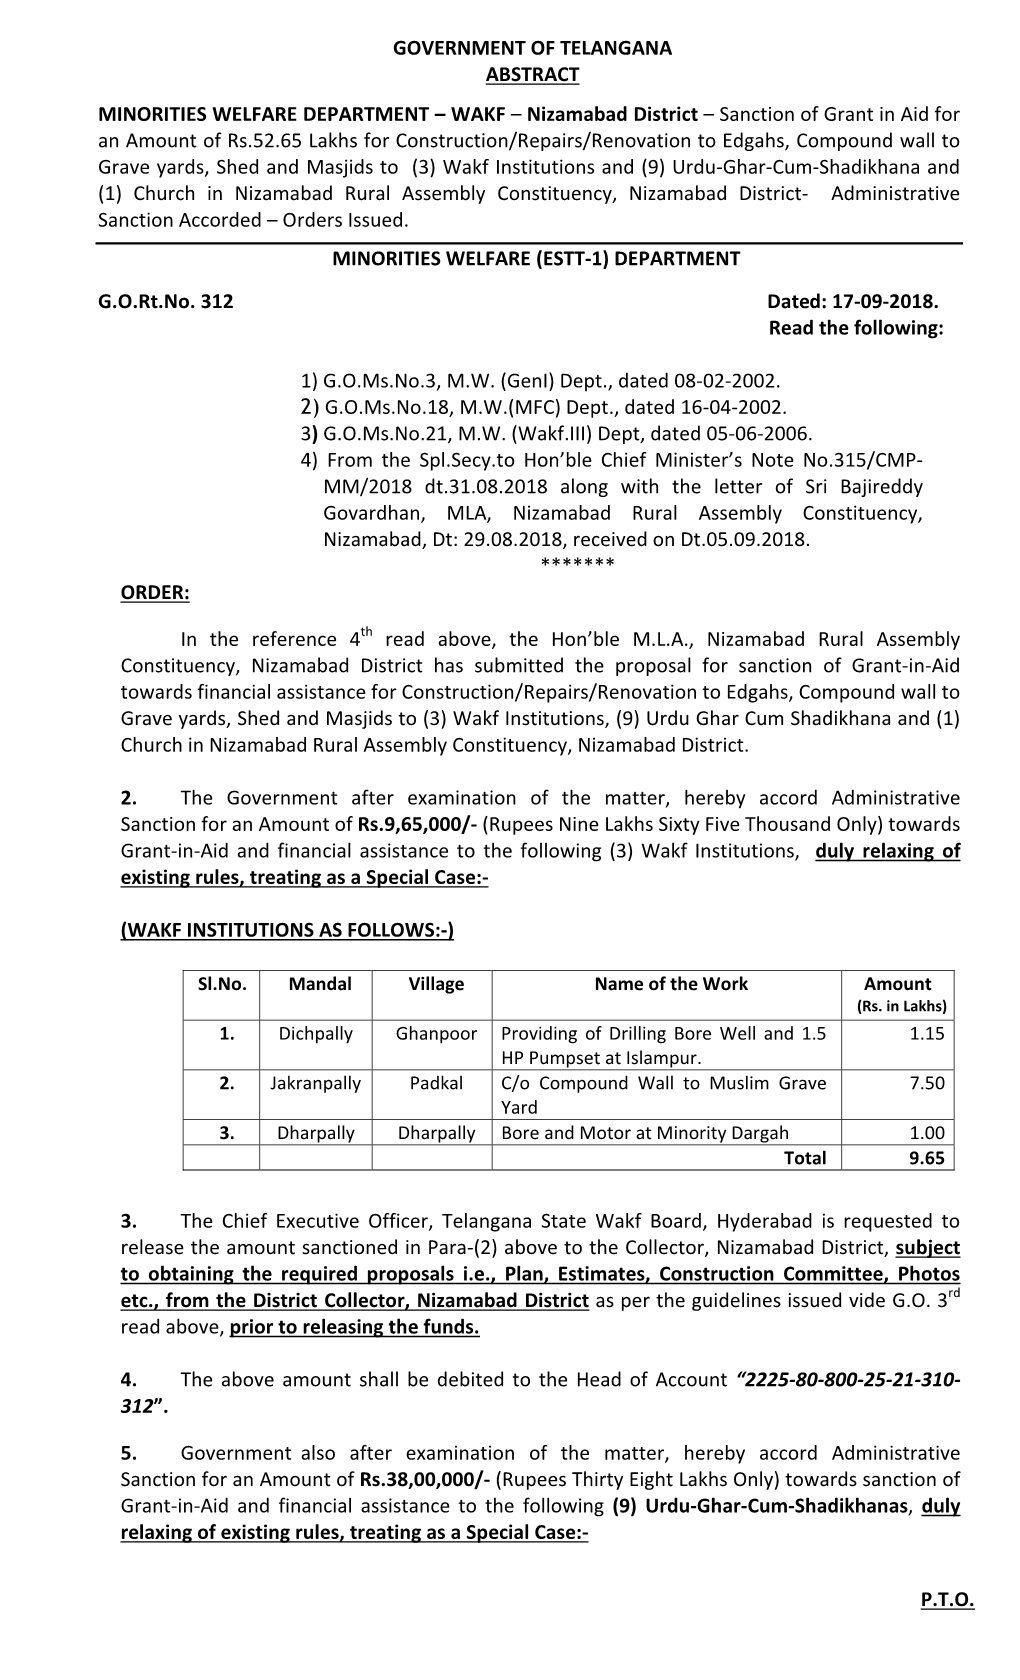 WAKF – Nizamabad District – Sanction of Grant in Aid